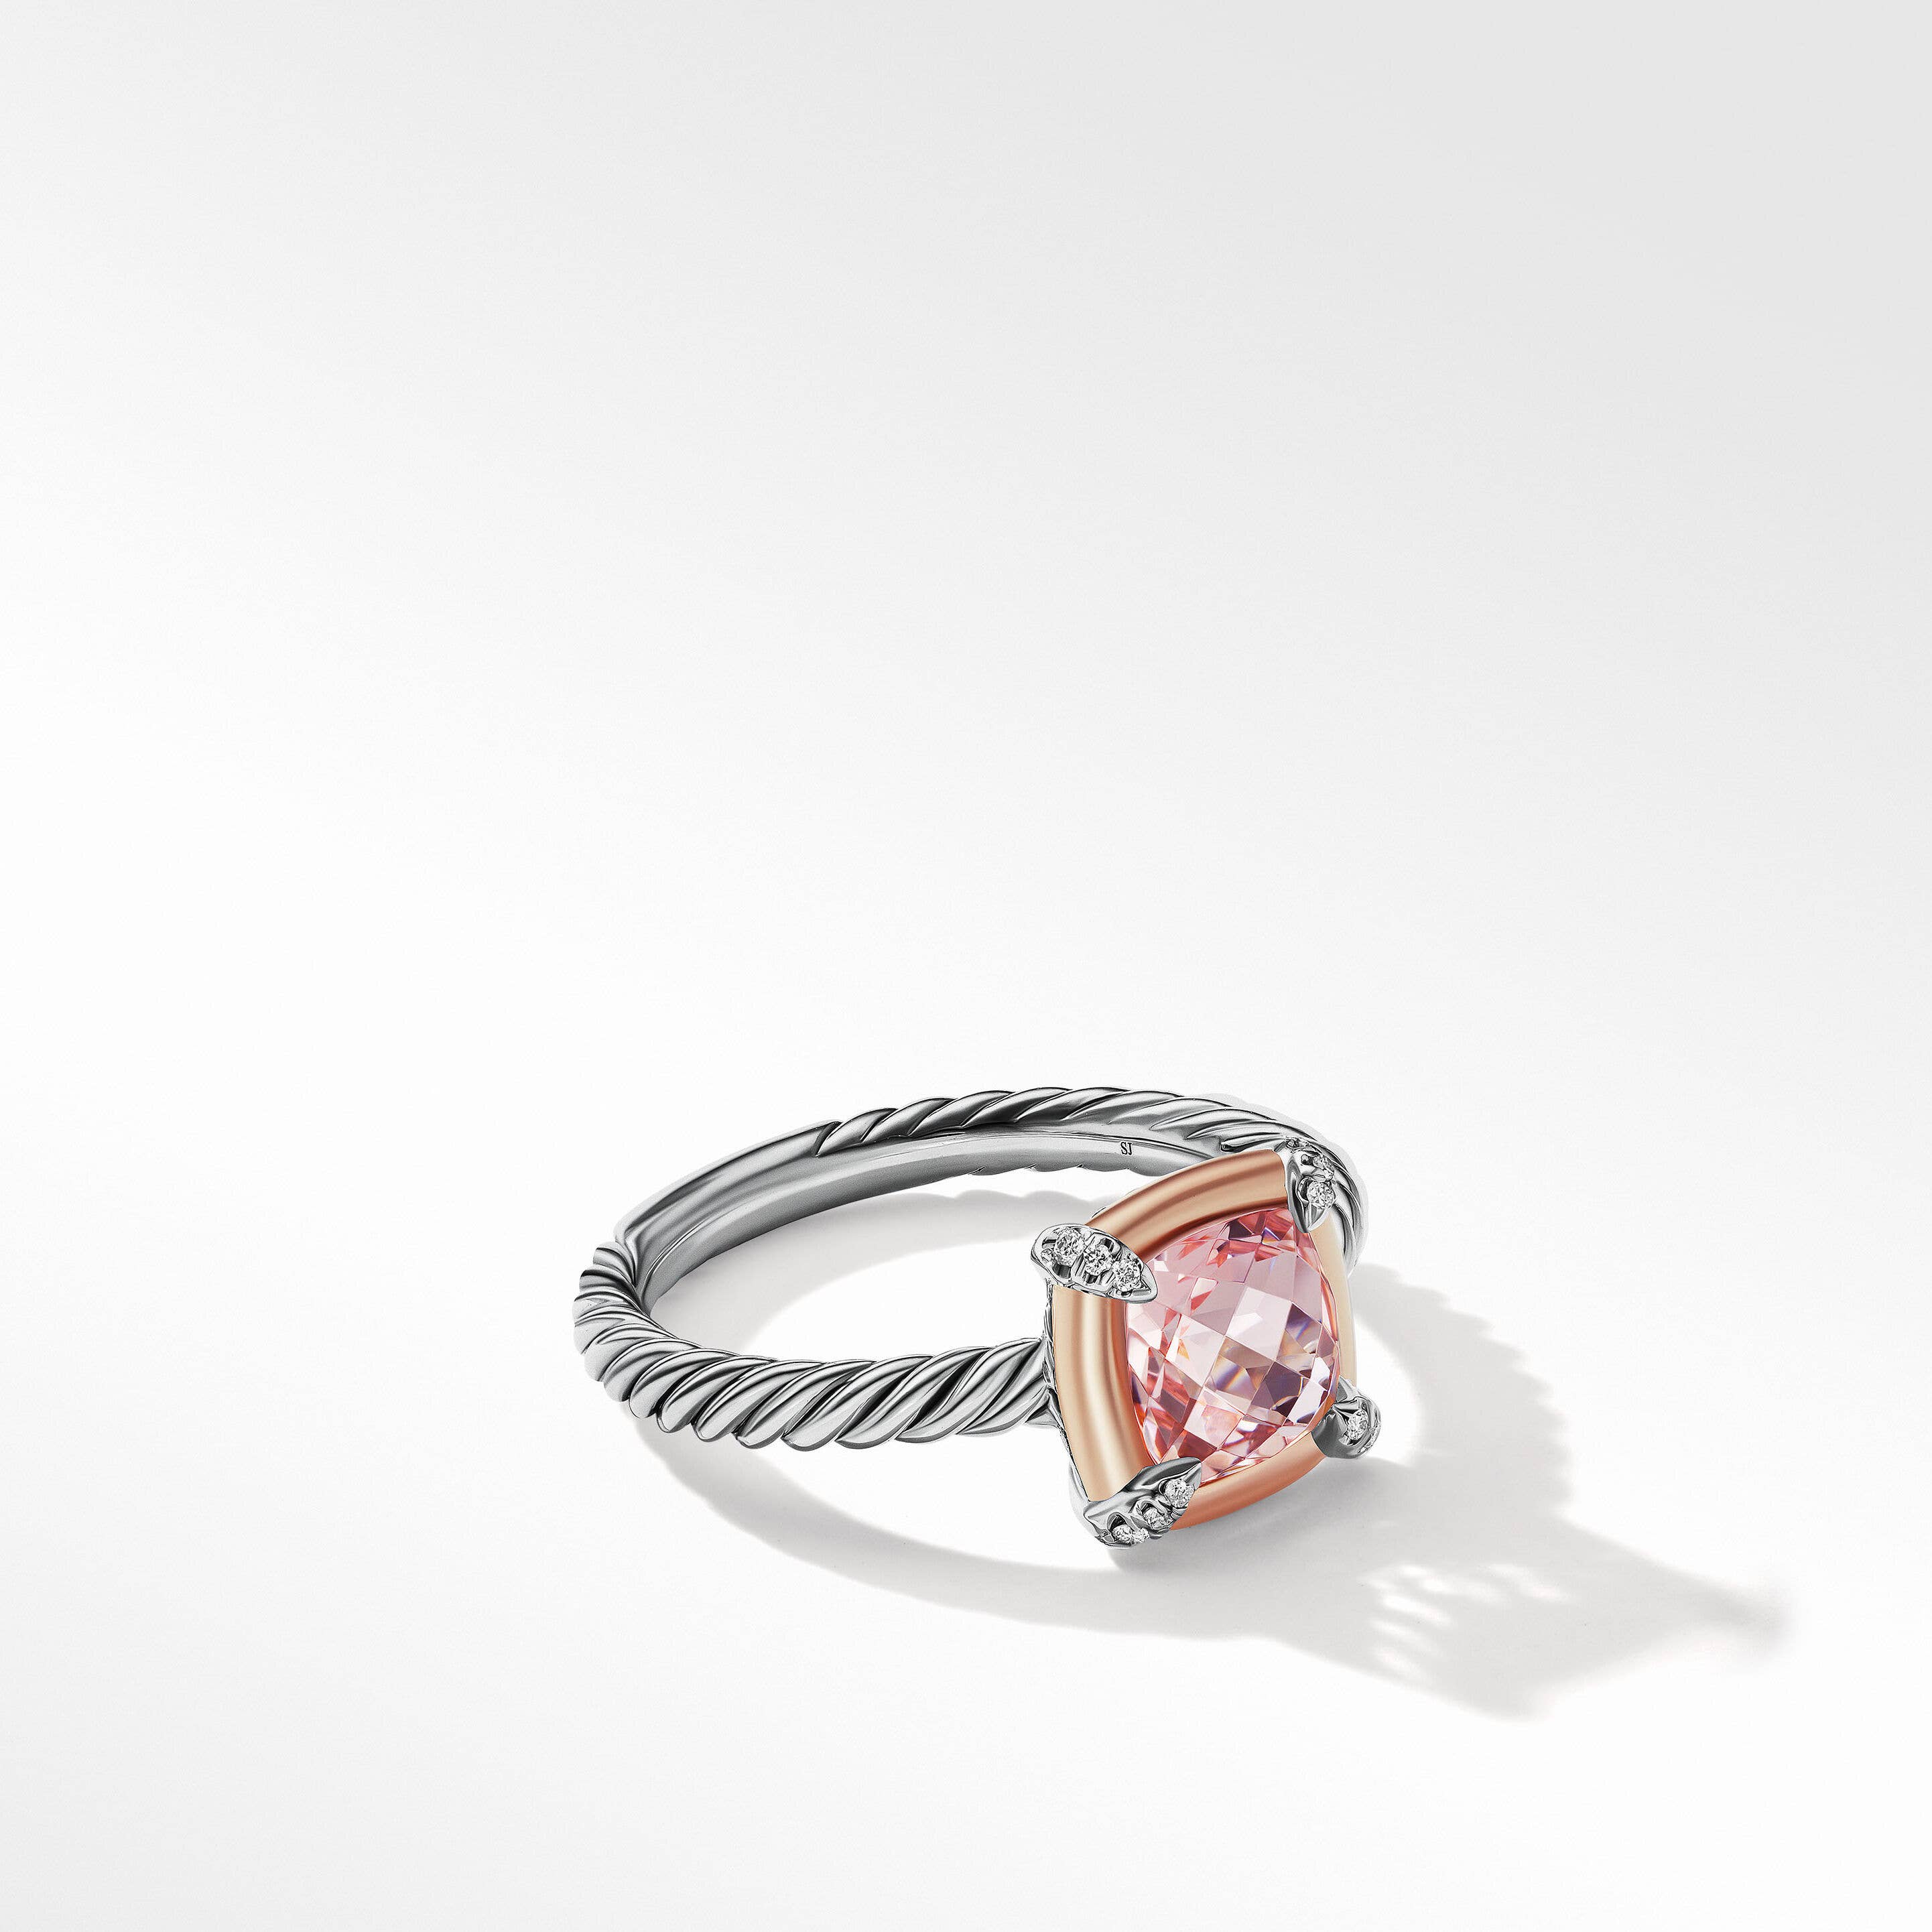 Petite Chatelaine® Ring with Morganite, 18K Rose Gold and Pavé Diamonds